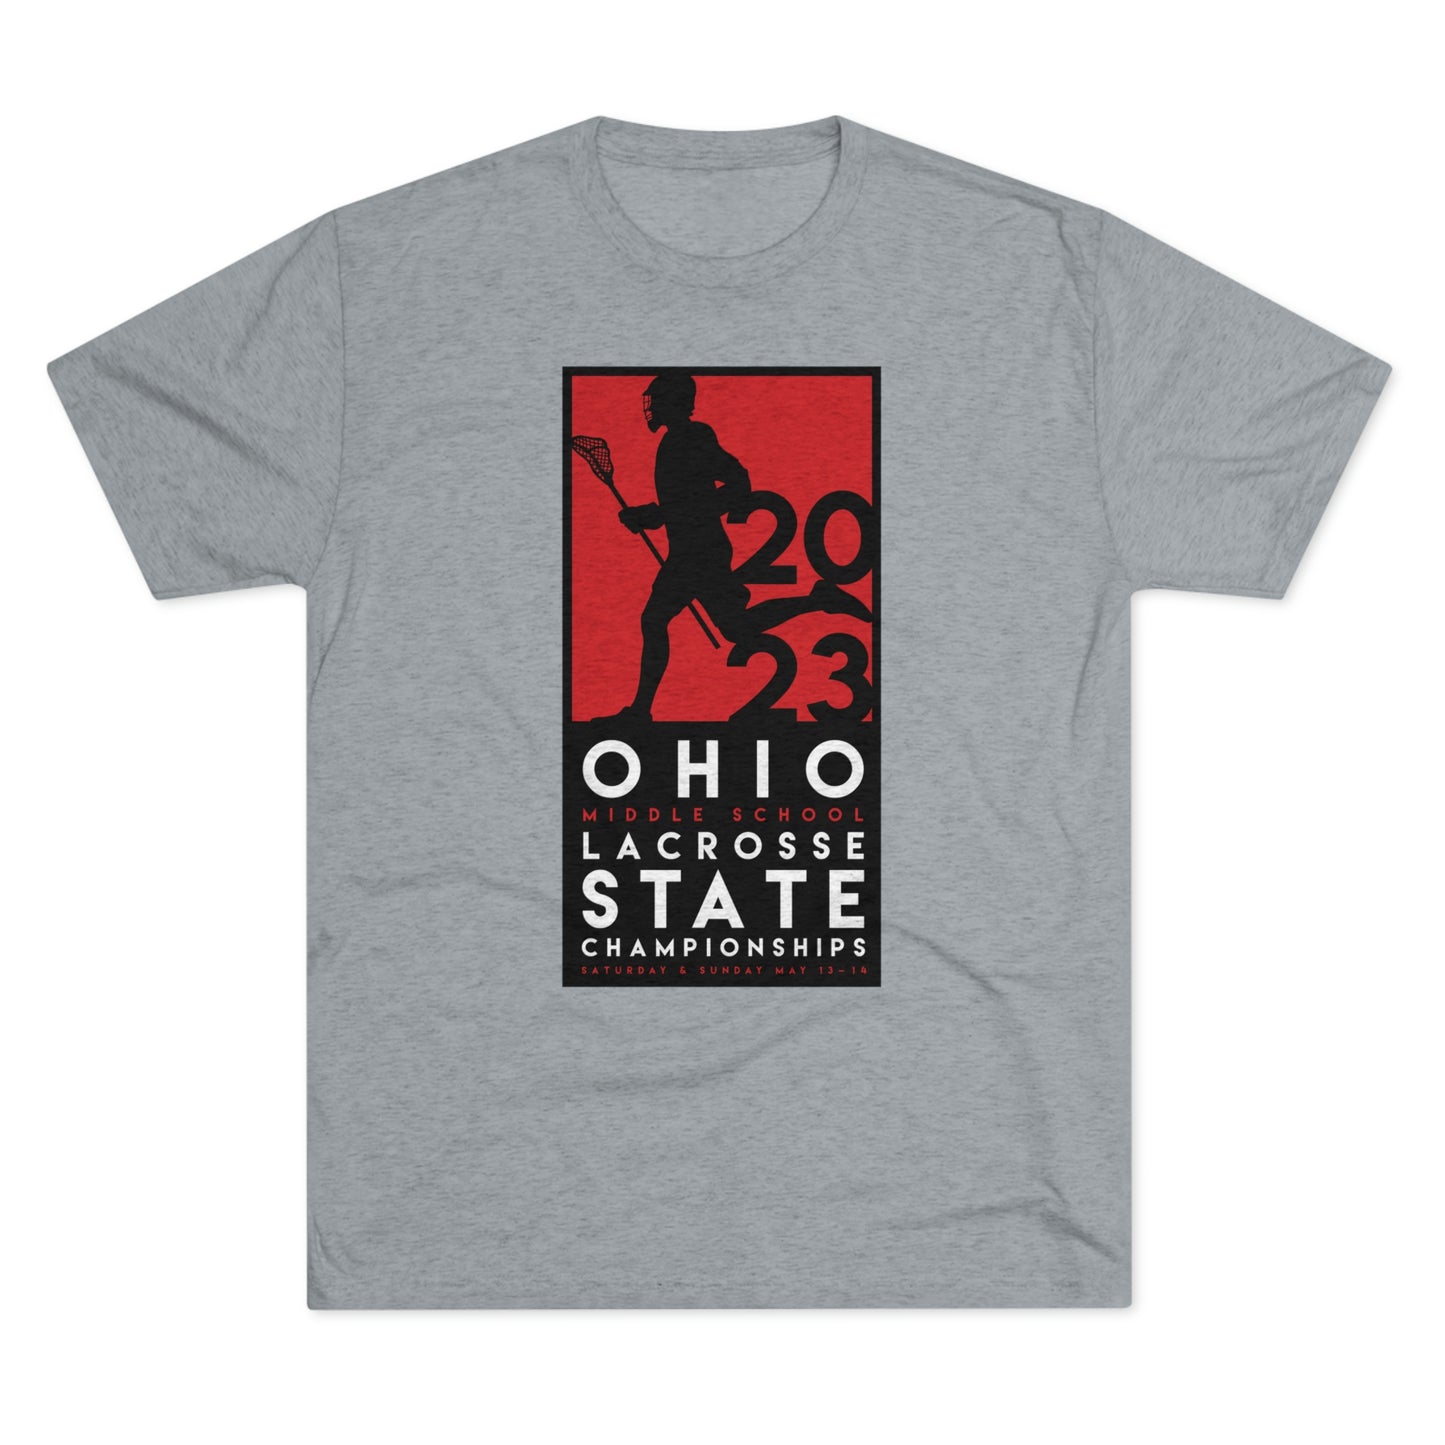 (no distress) 2023 PLAYER_STATE MIDDLE SCHOOL TOURNAMENT-Unisex Tri-Blend Crew Tee